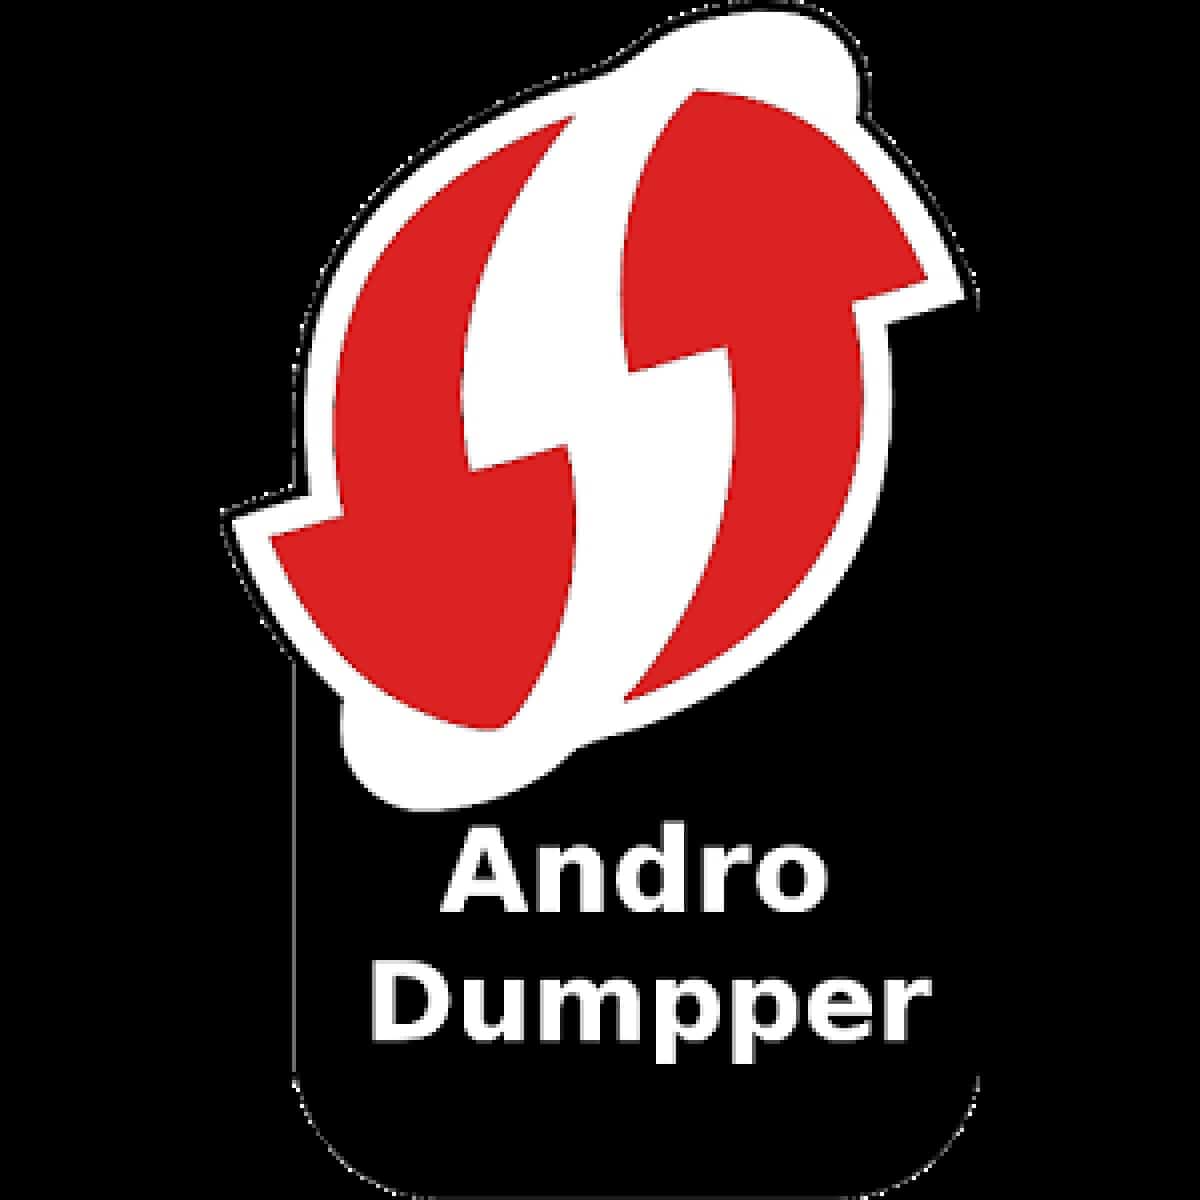 AndroDumpper Wifi ( WPS Connect ) APK Download Latest Version 3.11